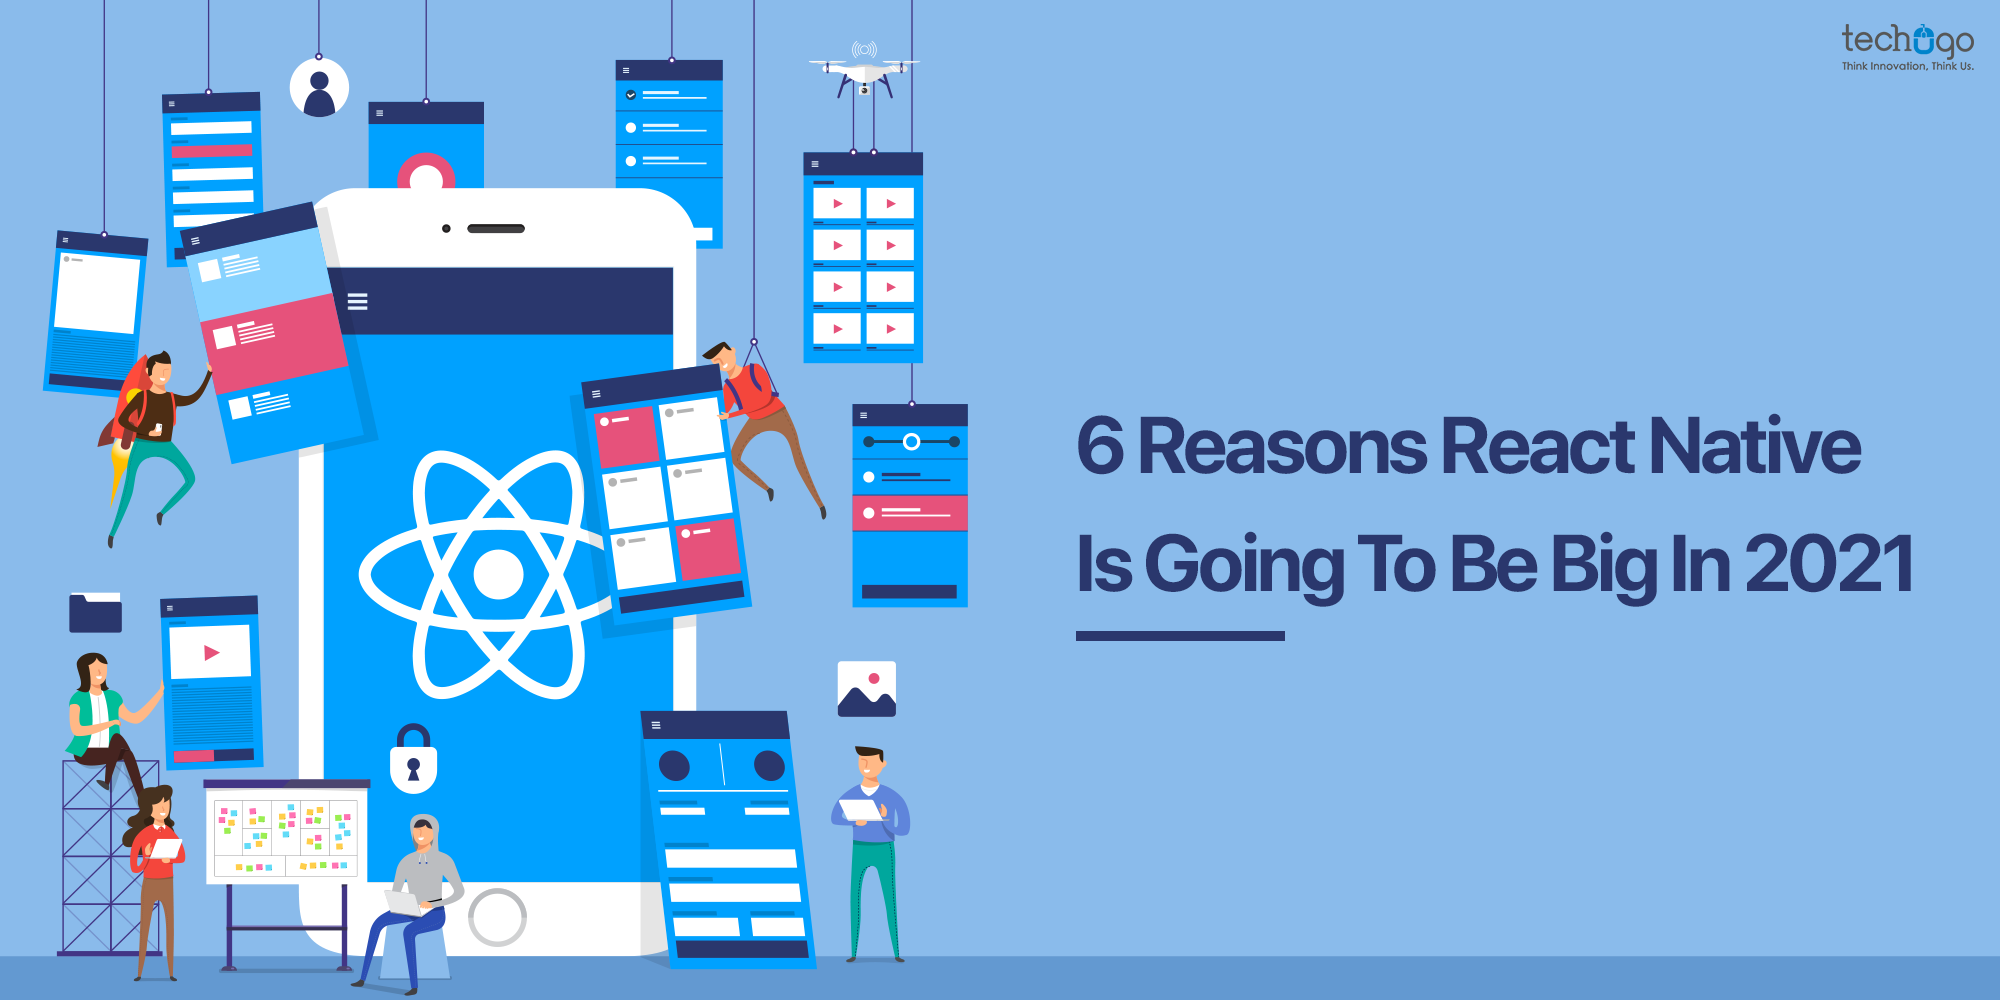 6 REASONS REACT NATIVE IS GOING TO BE BIG IN 2021!